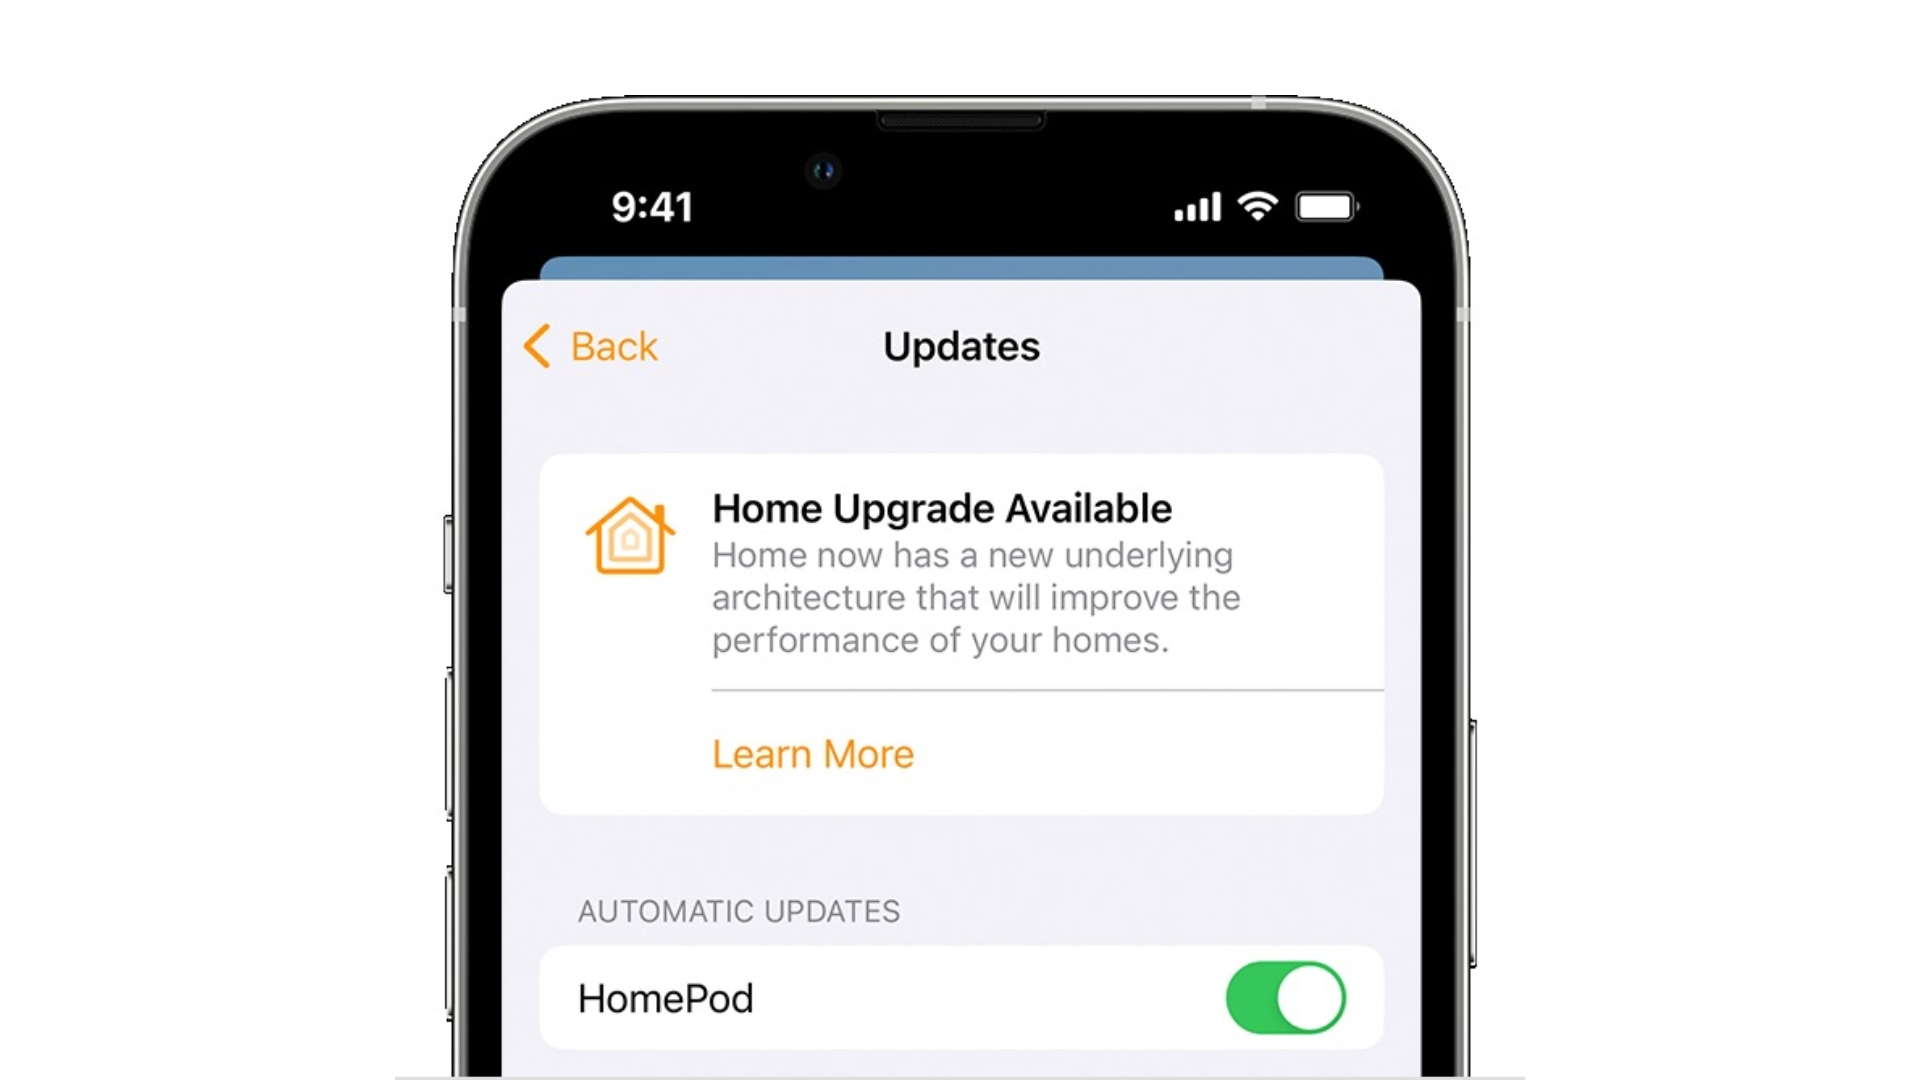 PSA: Apple Has Made Its New Home Architecture Update Available Again